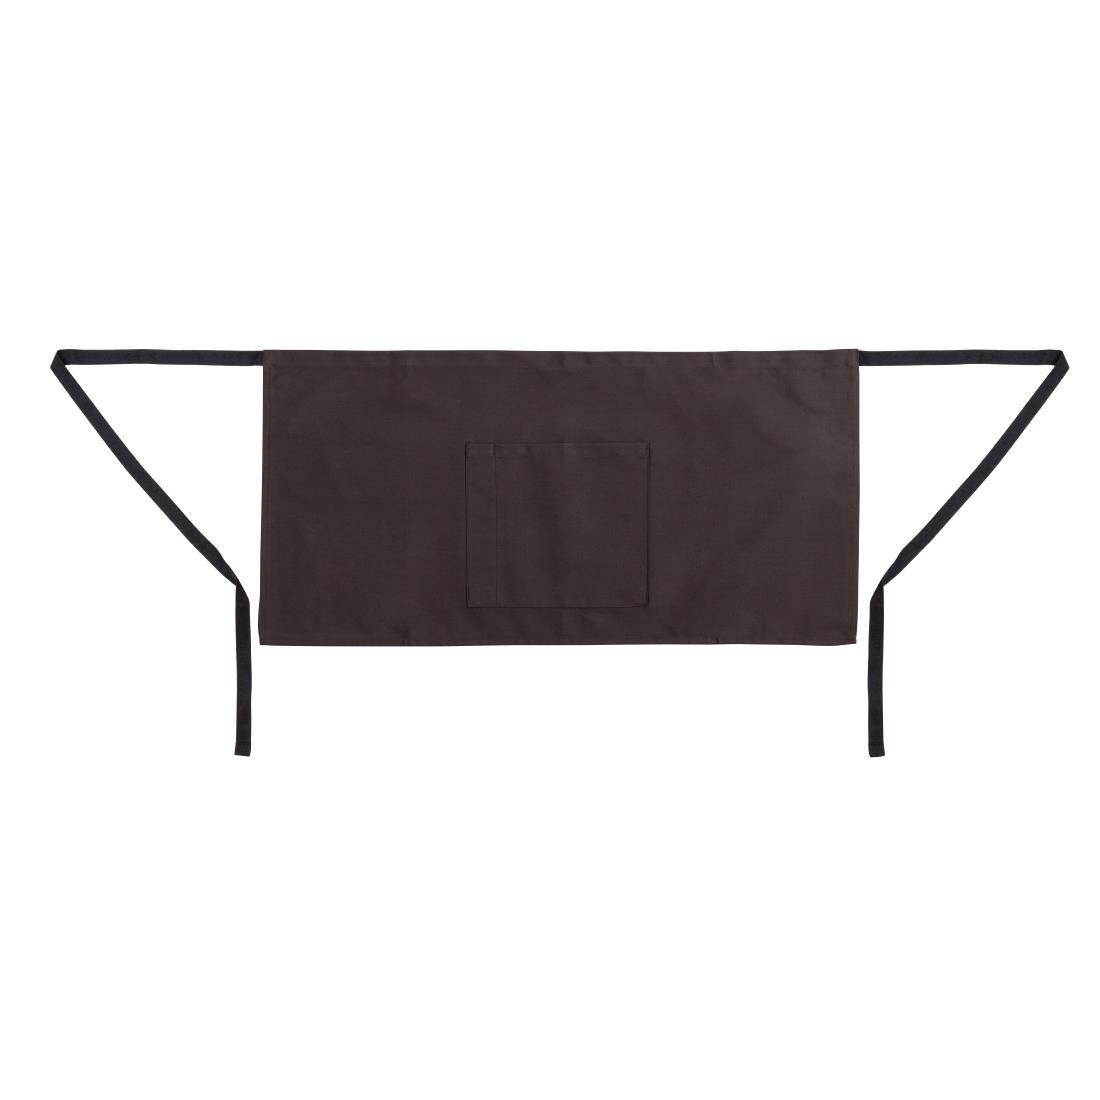 Chef Works Short Bistro Apron Charcoal - A906  - 2